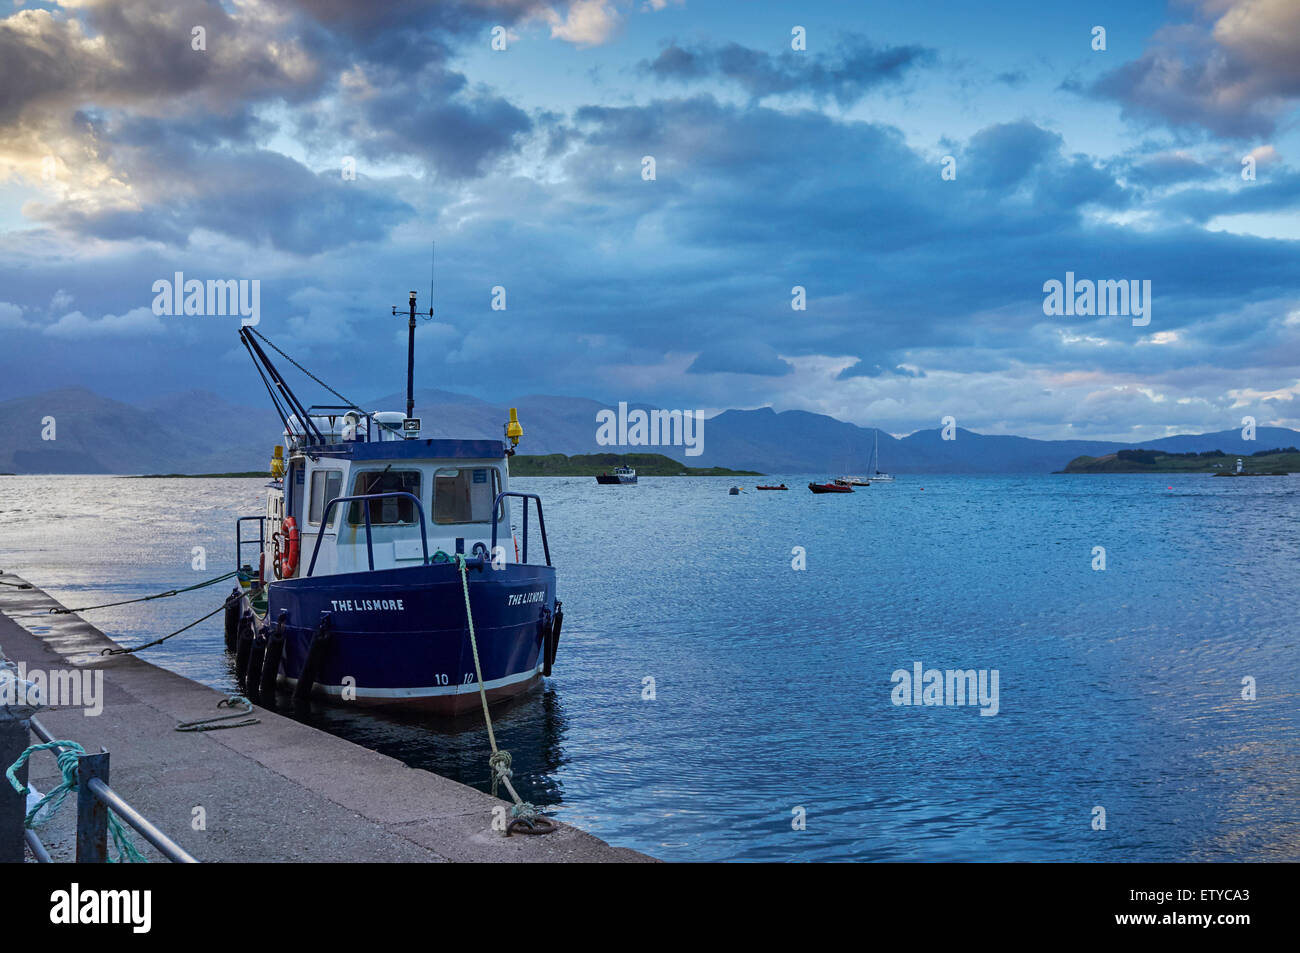 Dusk, Port Appin, Argyll, Western Scotland with the Lismore ferry docked Stock Photo